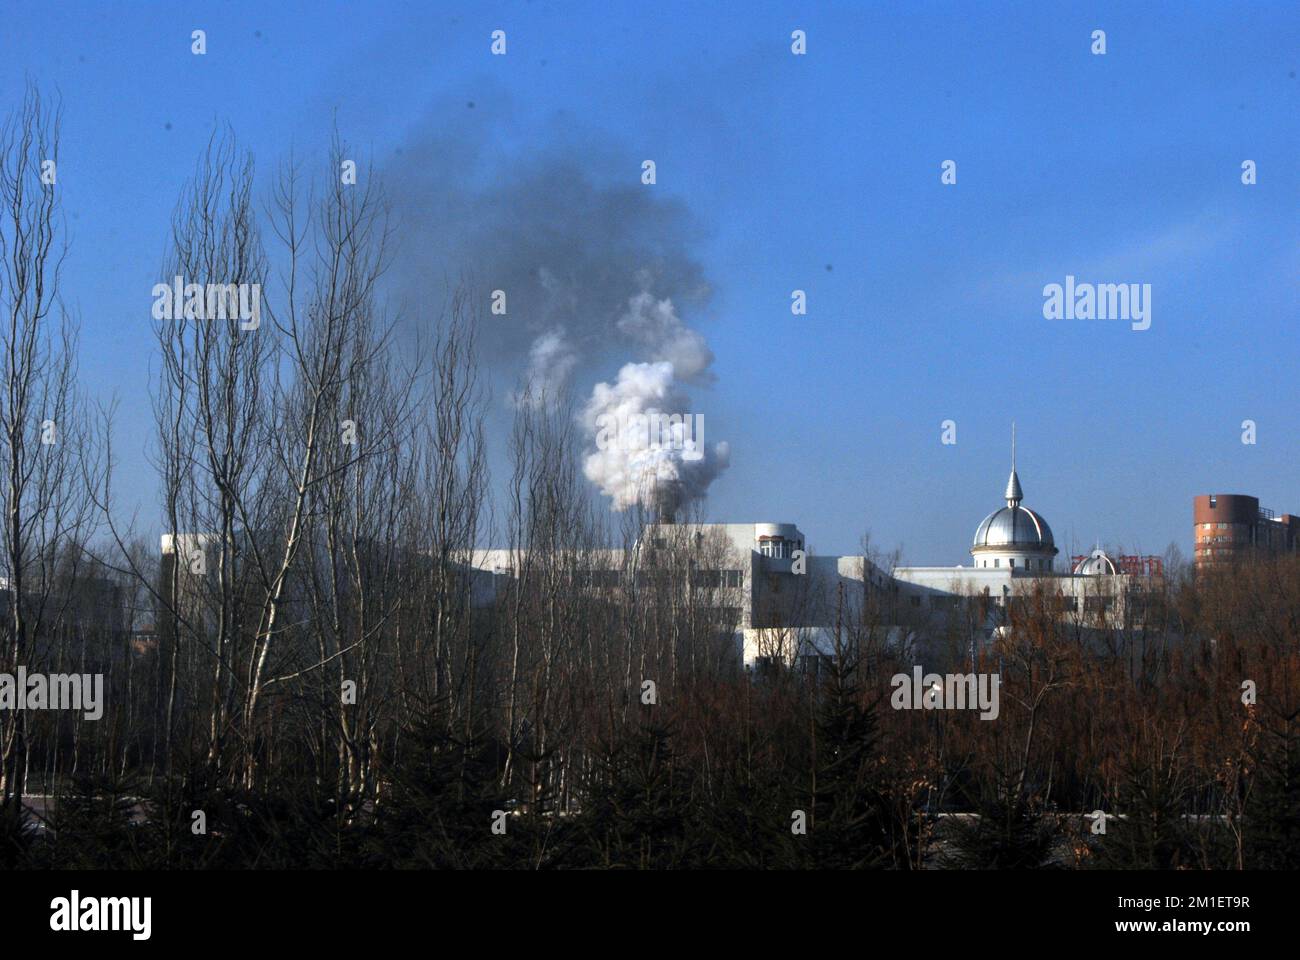 An exterior shot of a factory smoke coming out of the chimney with trees in the foreground Stock Photo